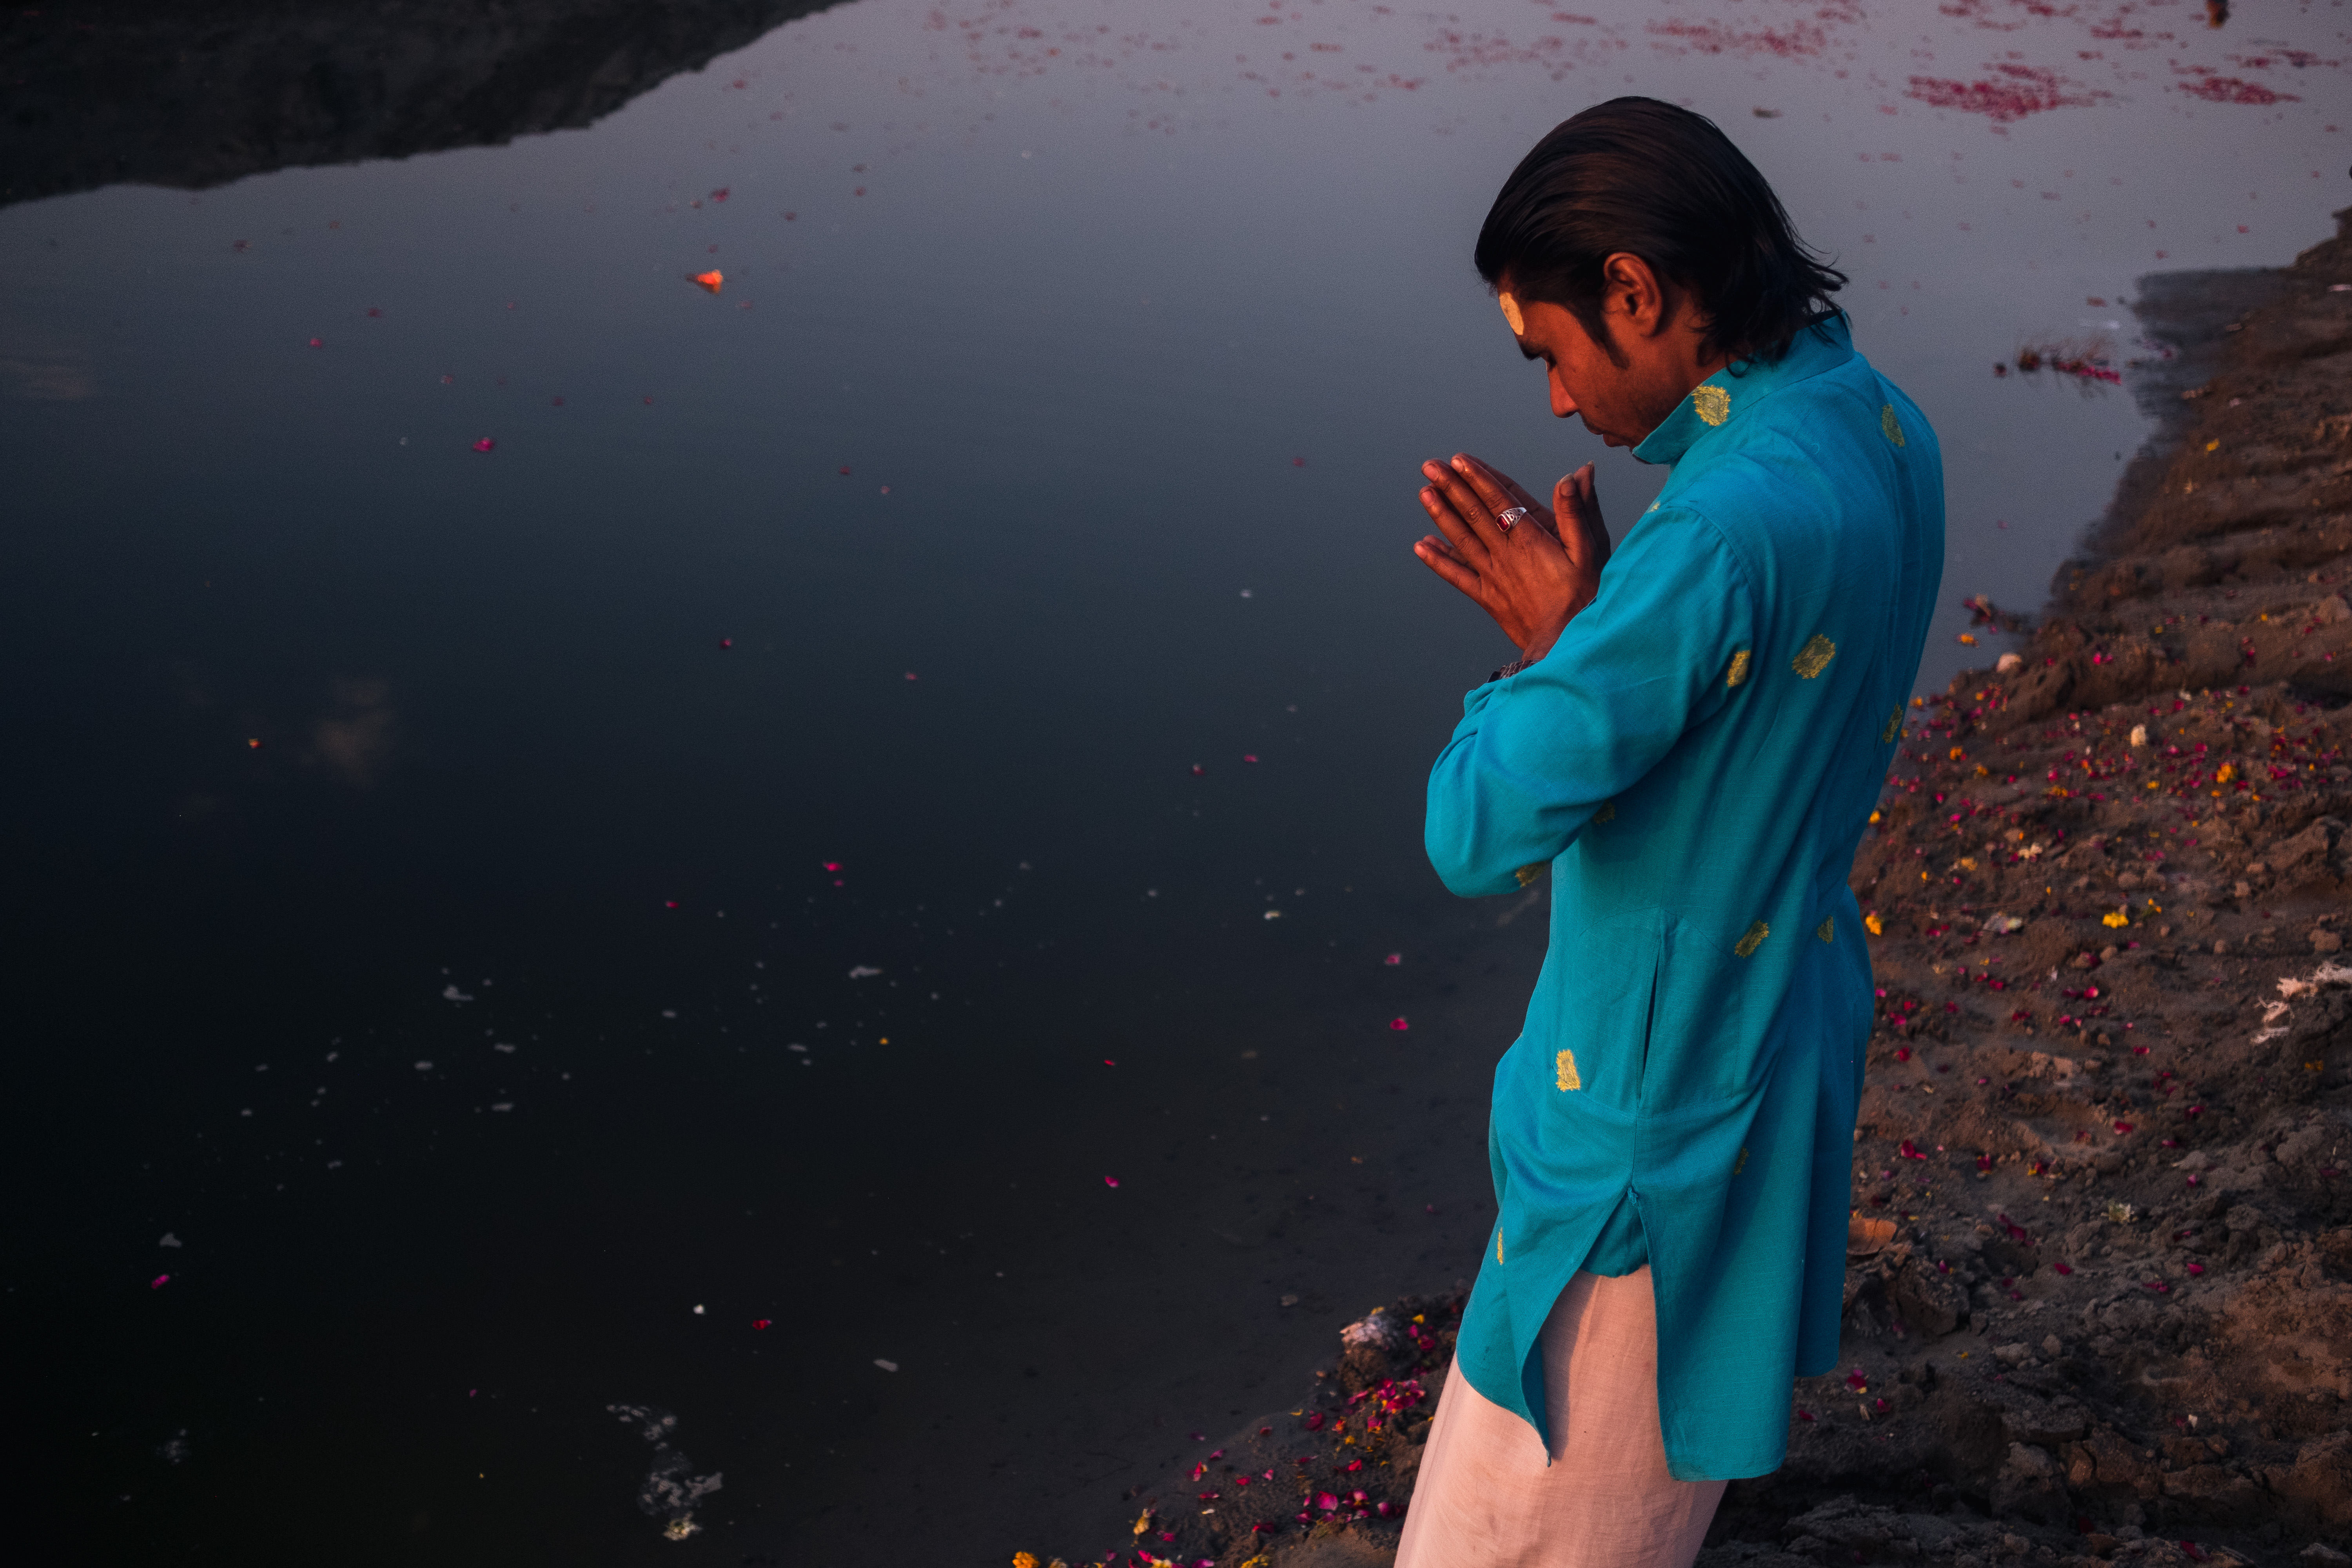 India Street Photography During Holi Festival. Man prays on the waters edge. Images by Jason Vinson